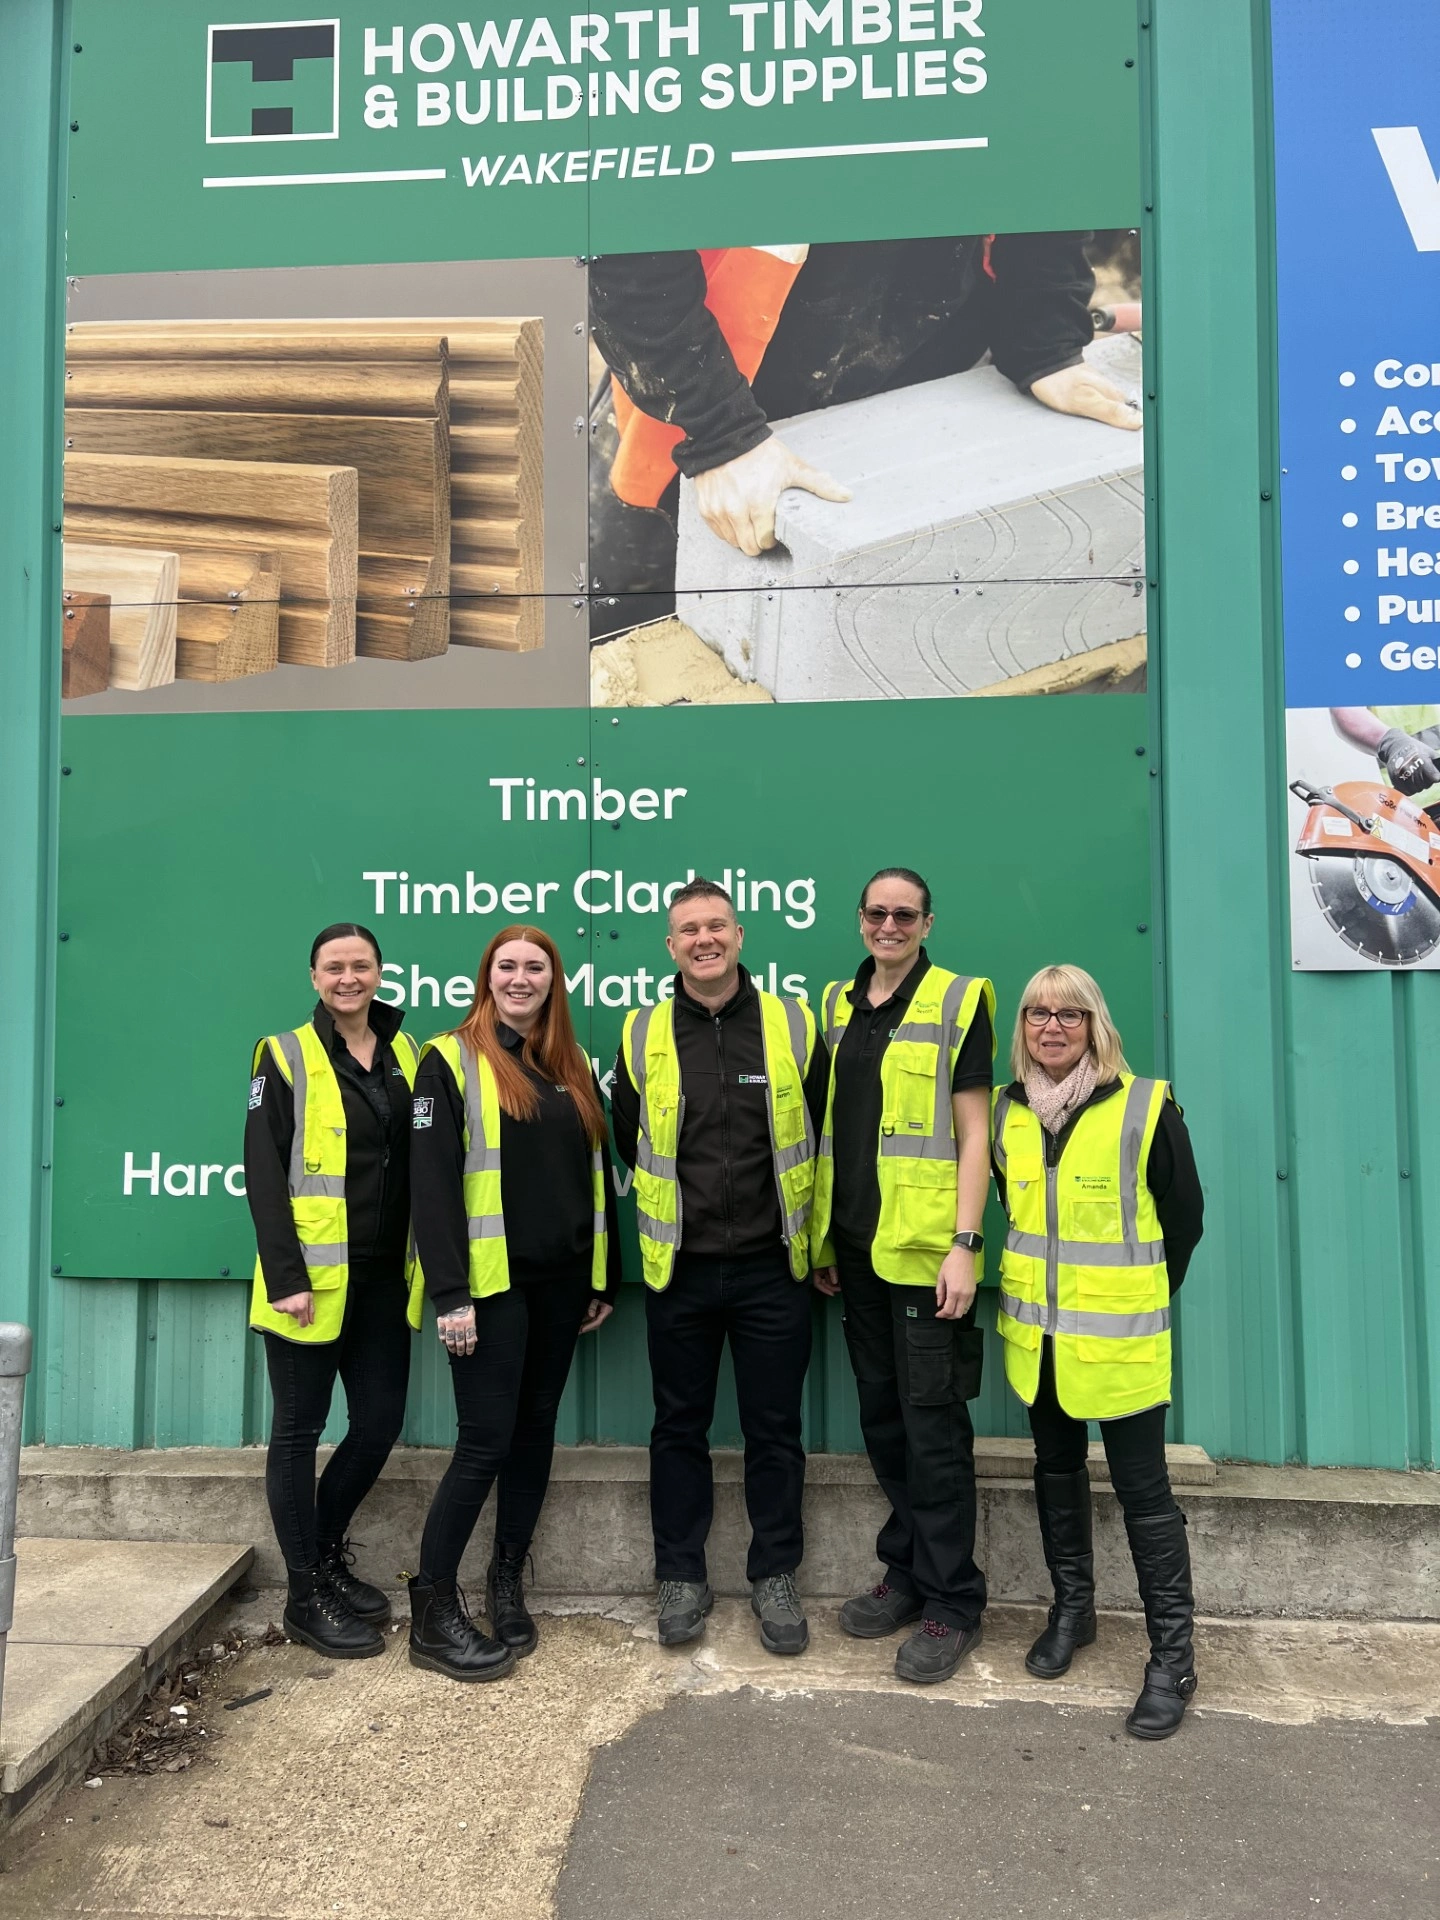 Four people pictured in front of the Howarth Timber logo sign, one of which being Ashley Rice, our new Assistant Branch Manager